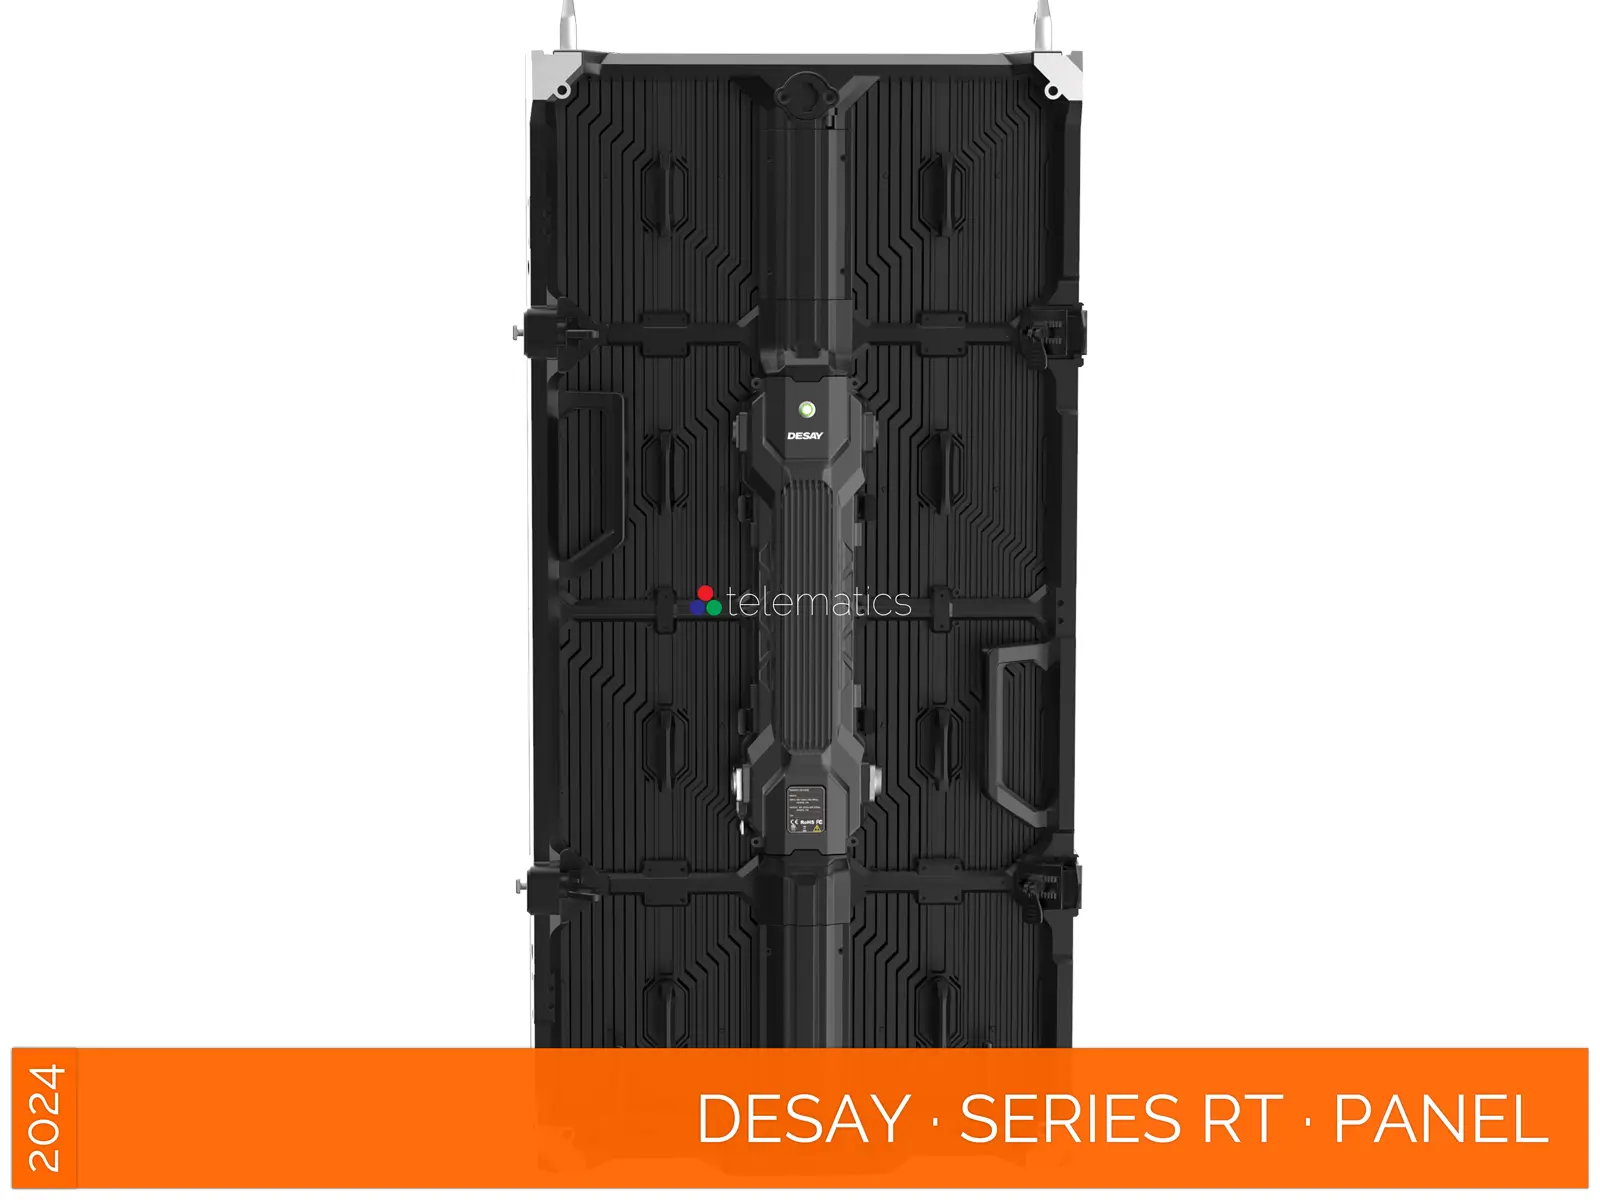 Desay · Series RT · Direct View LED Display Panel · Full Pixel Range · Rental Or Touring · Outdoor Rated · Rapid Service And Setup · Robust Panels For Rugged Use · NovaStar COEX MX CX · Vision Management Platform · Viplex · review · price · cost · priced from $1,790 per square meter